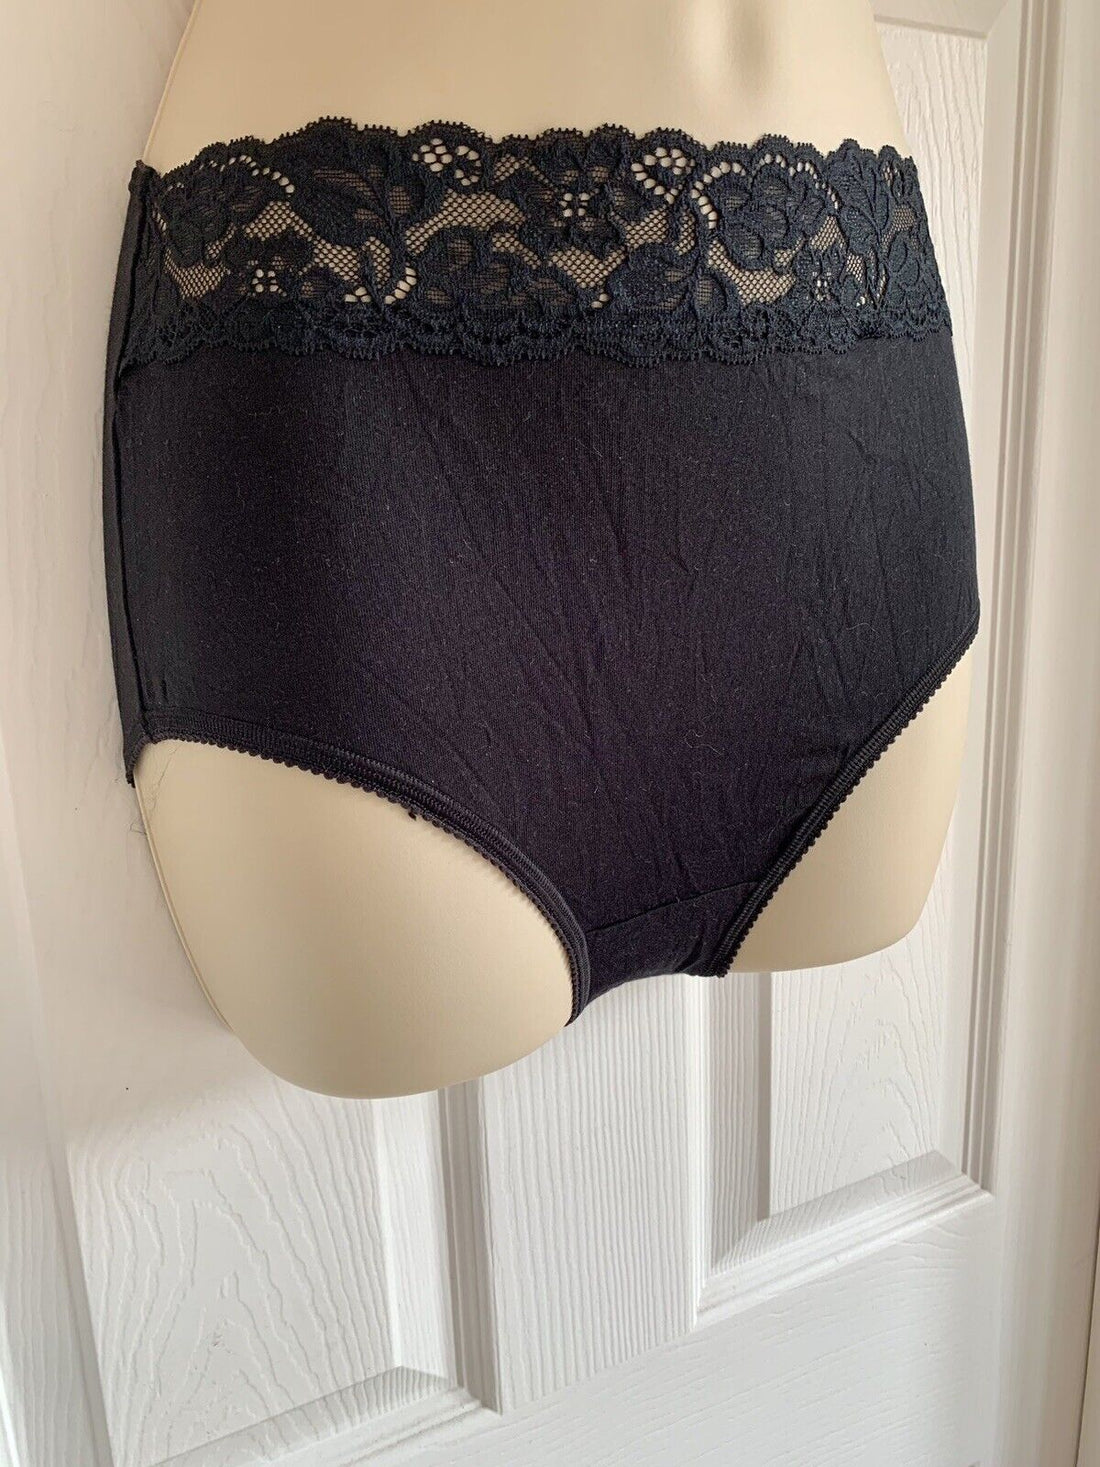 New Ex M&S Wild Bloom Lace High Rise Full Briefs Pink Almond Black White  Blue